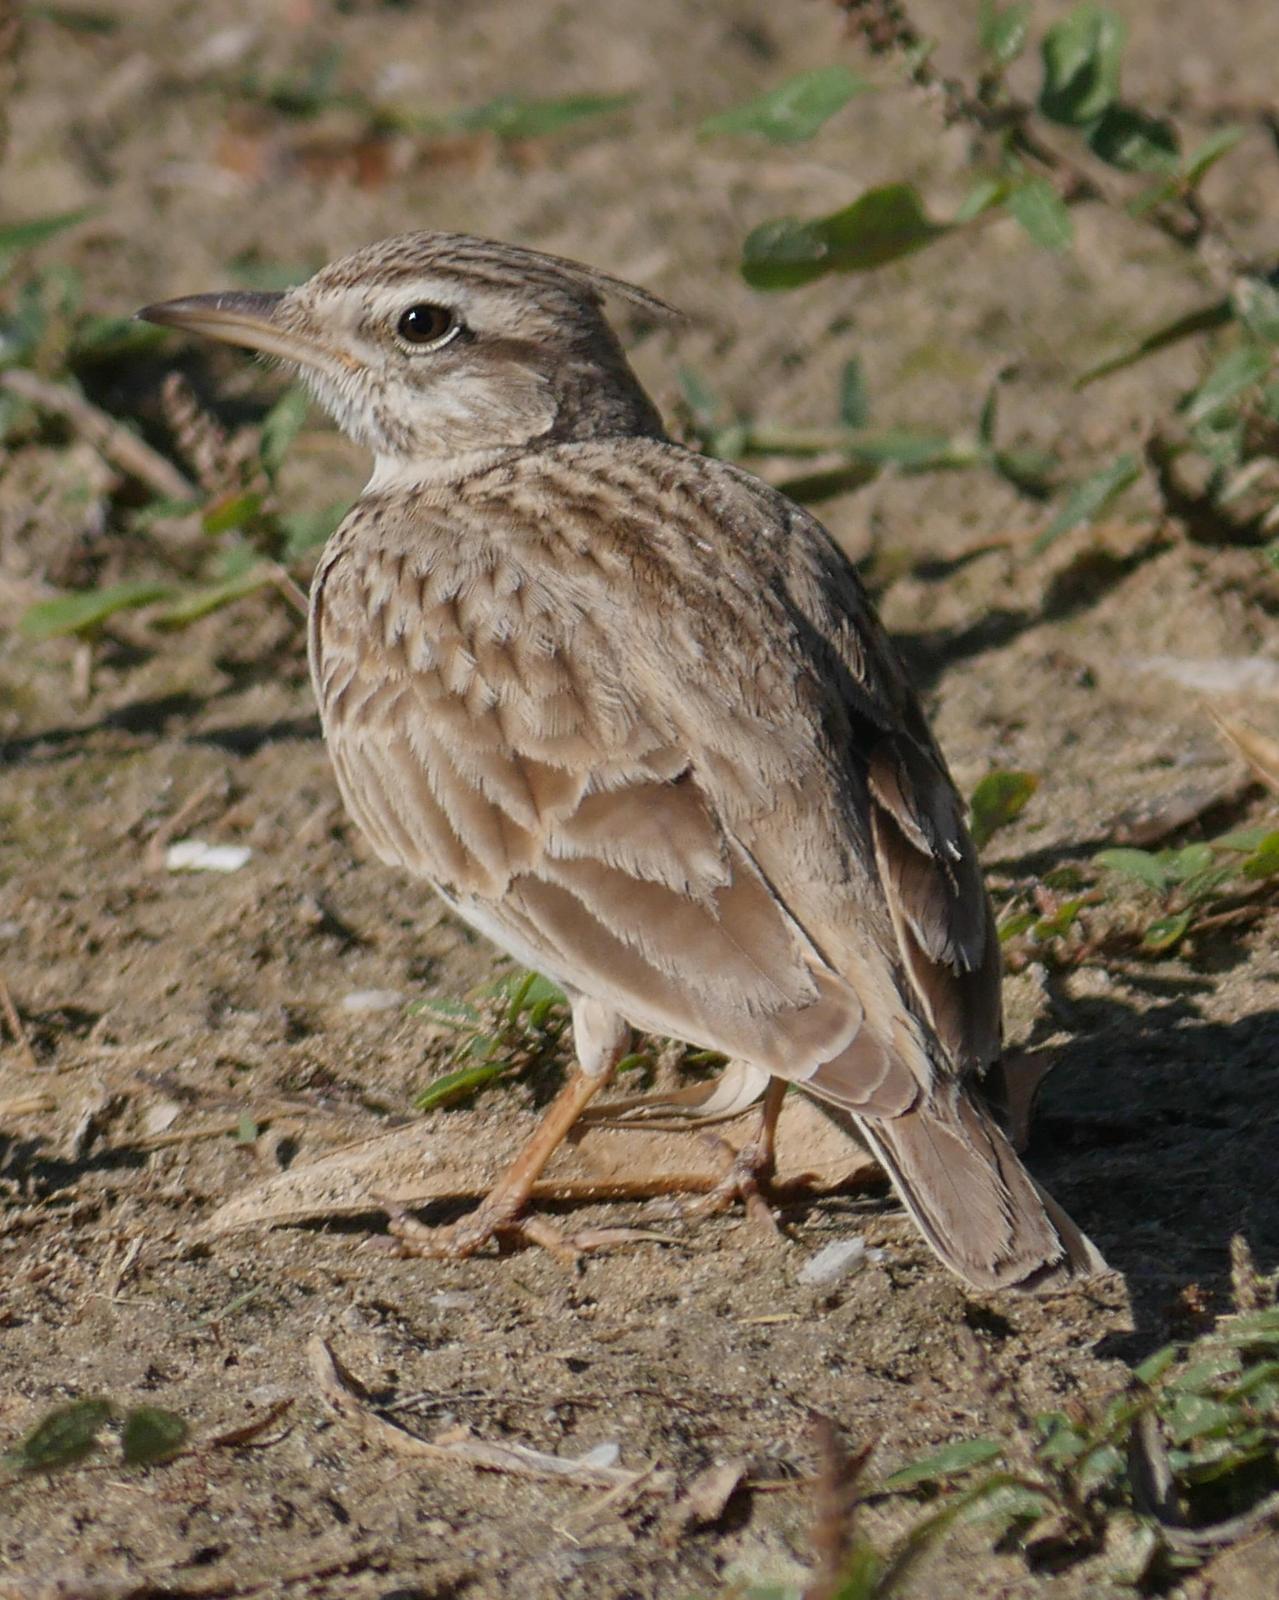 Crested/Maghreb Lark Photo by Peter Lowe